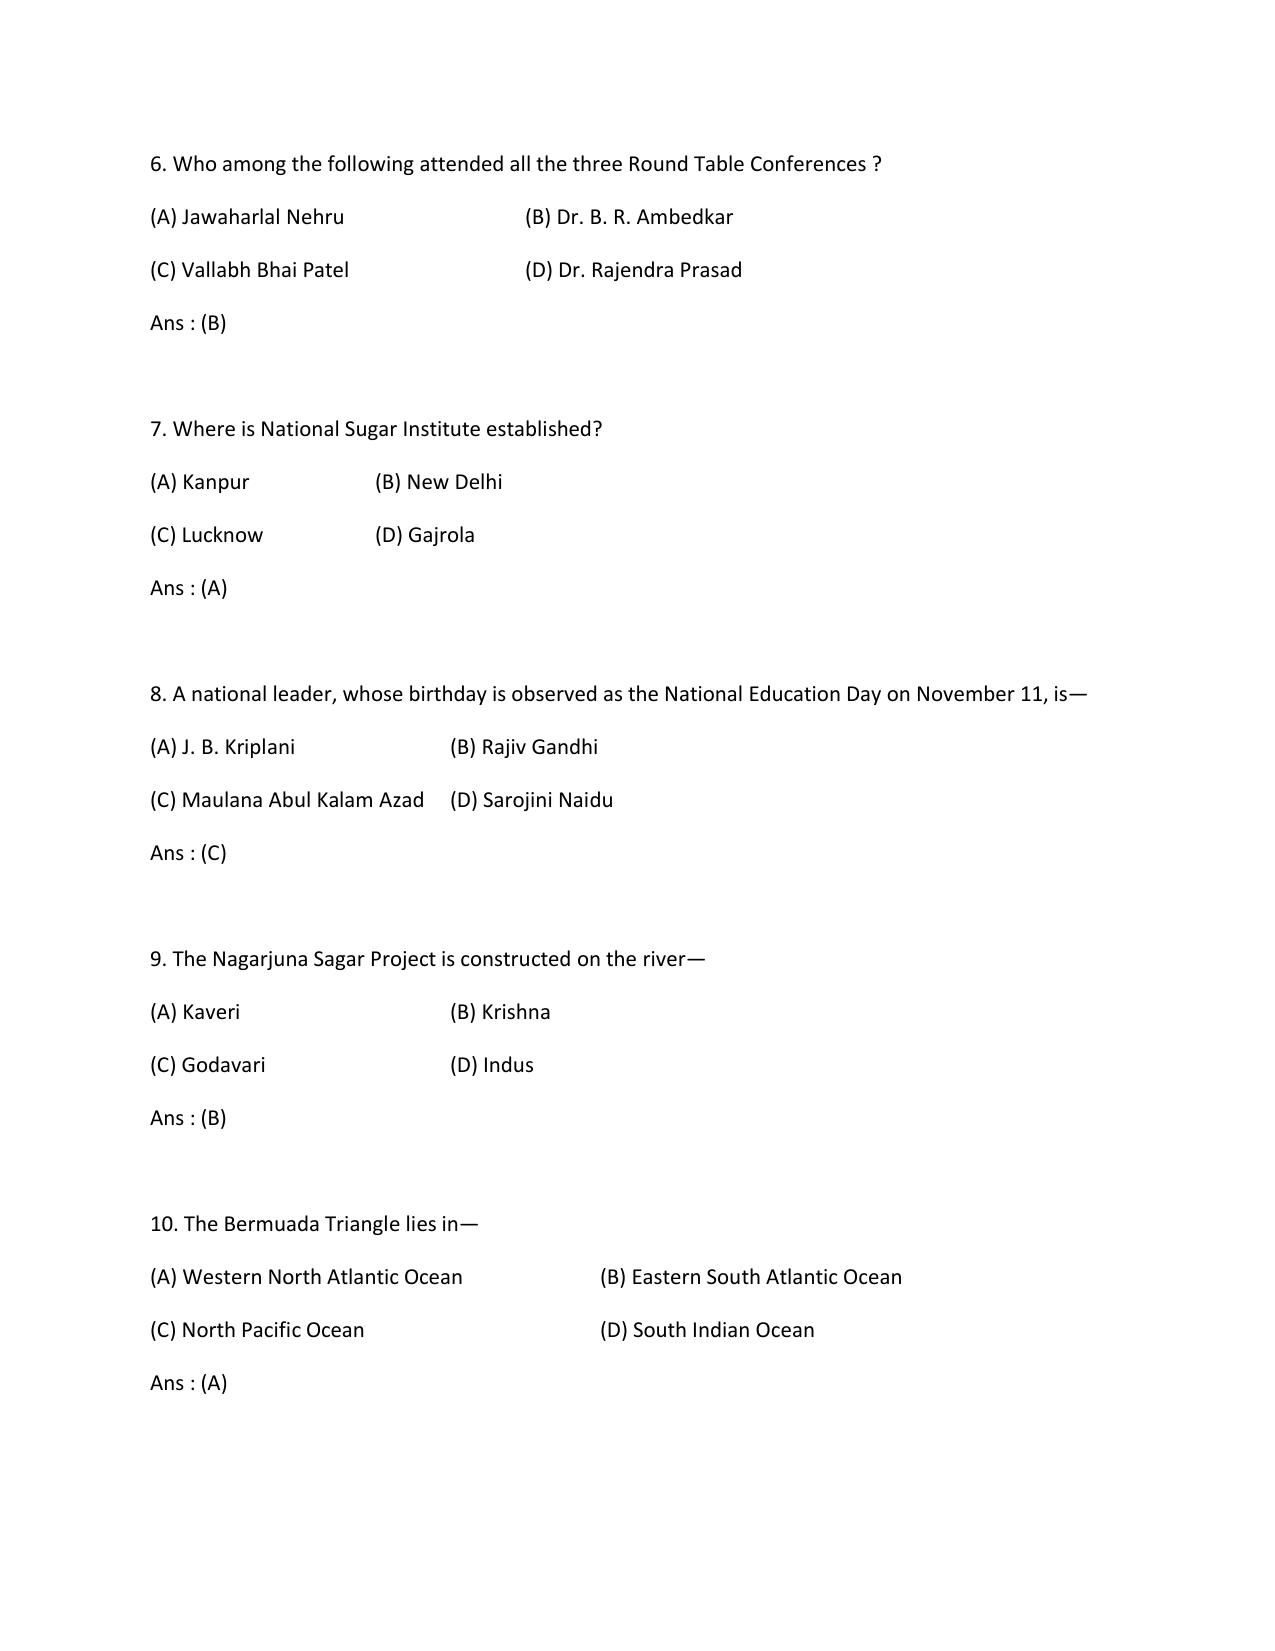 NEIGRIHMS Nursing Officer General Knowledge Practice Papers - Page 2